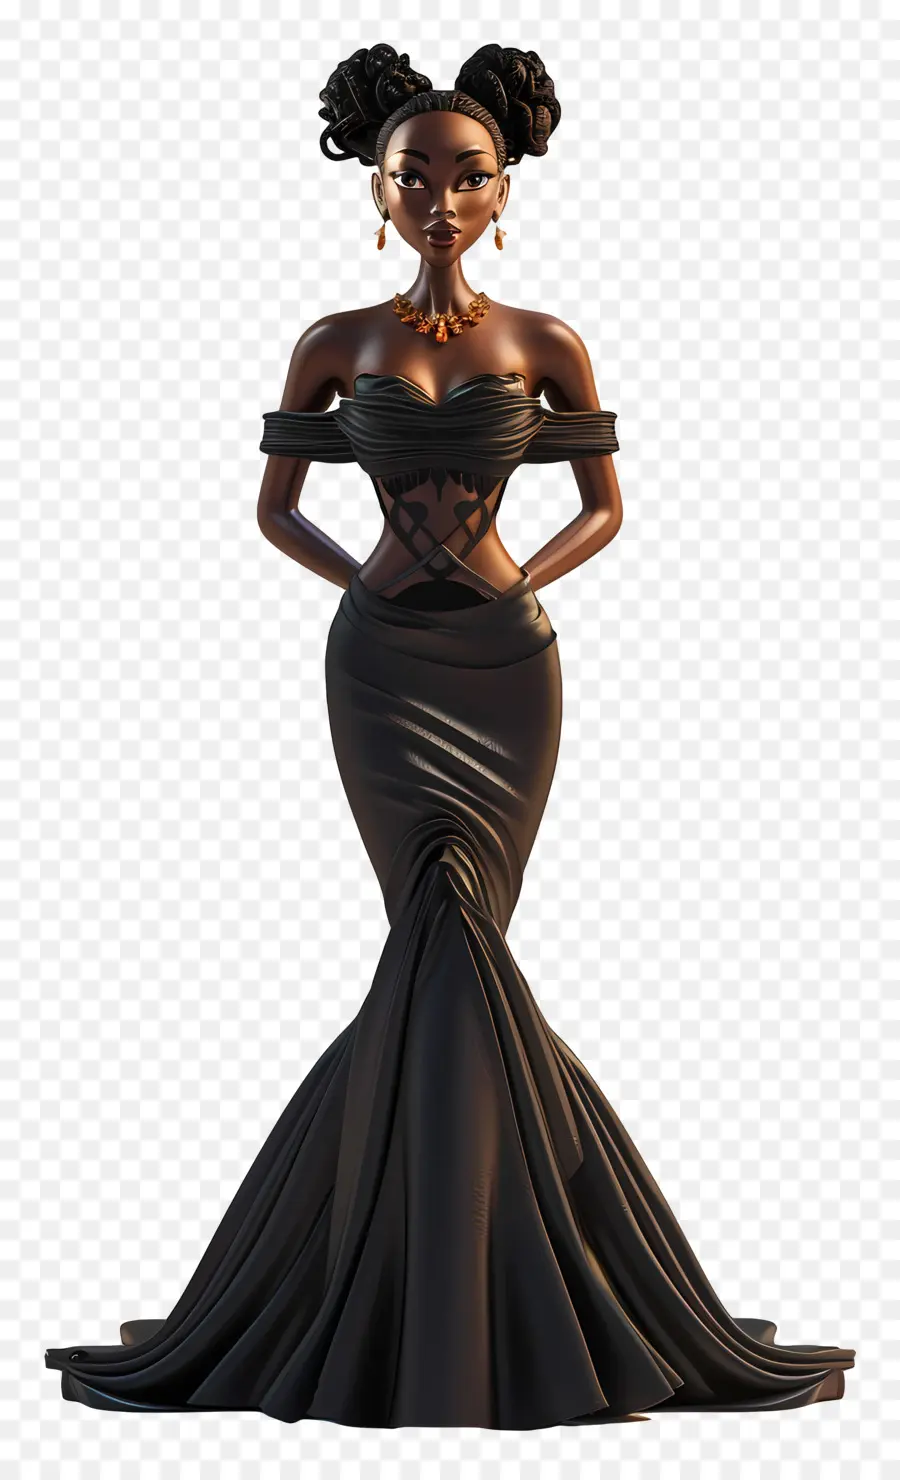 black girl in dress black evening gown off-the-shoulder sleeves formal event high-heeled shoes